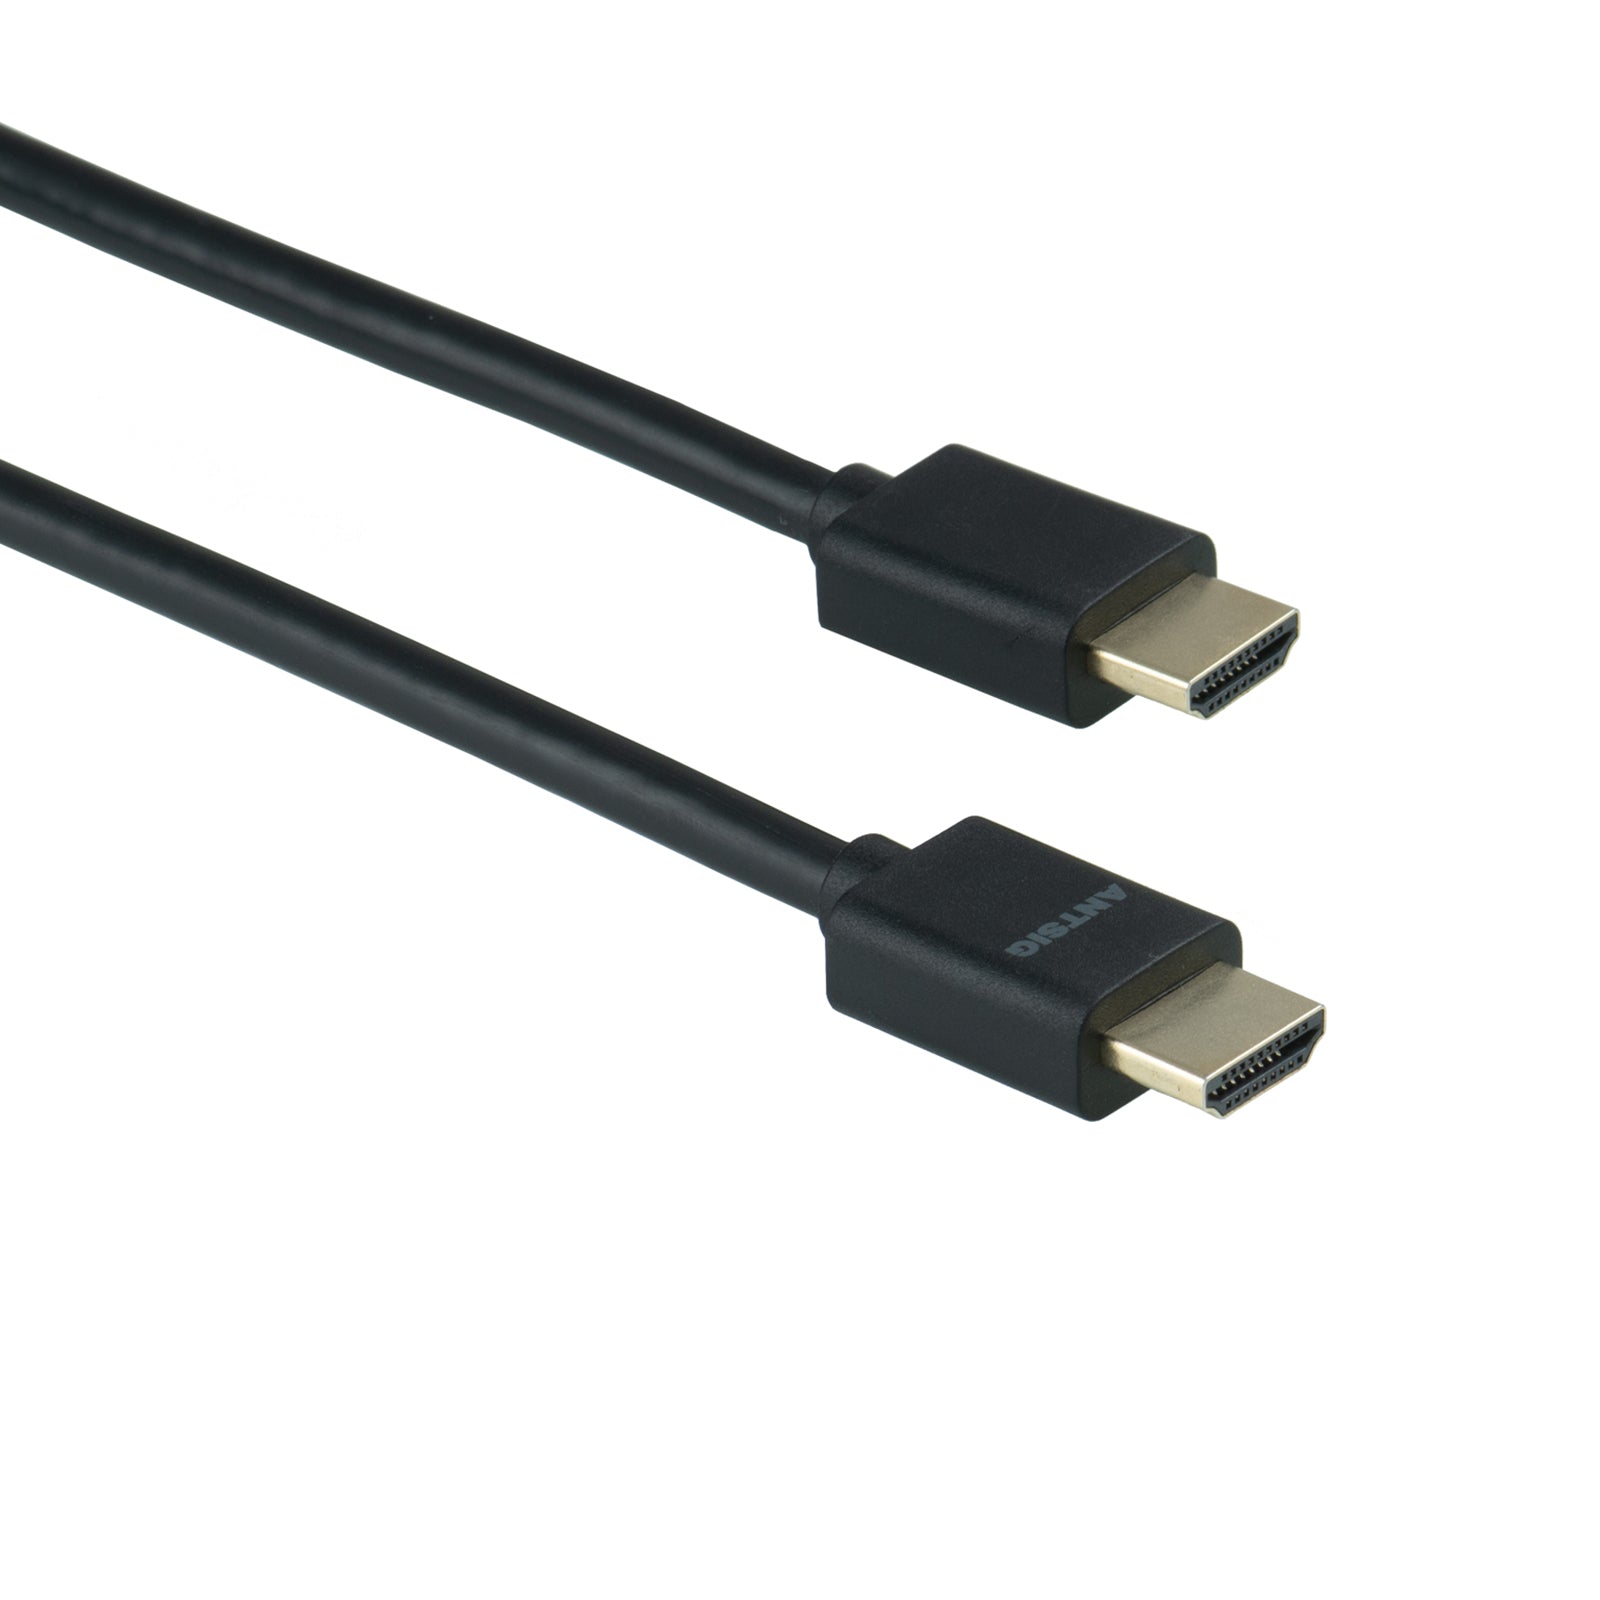 5m 1080p 4K HDMI Cable